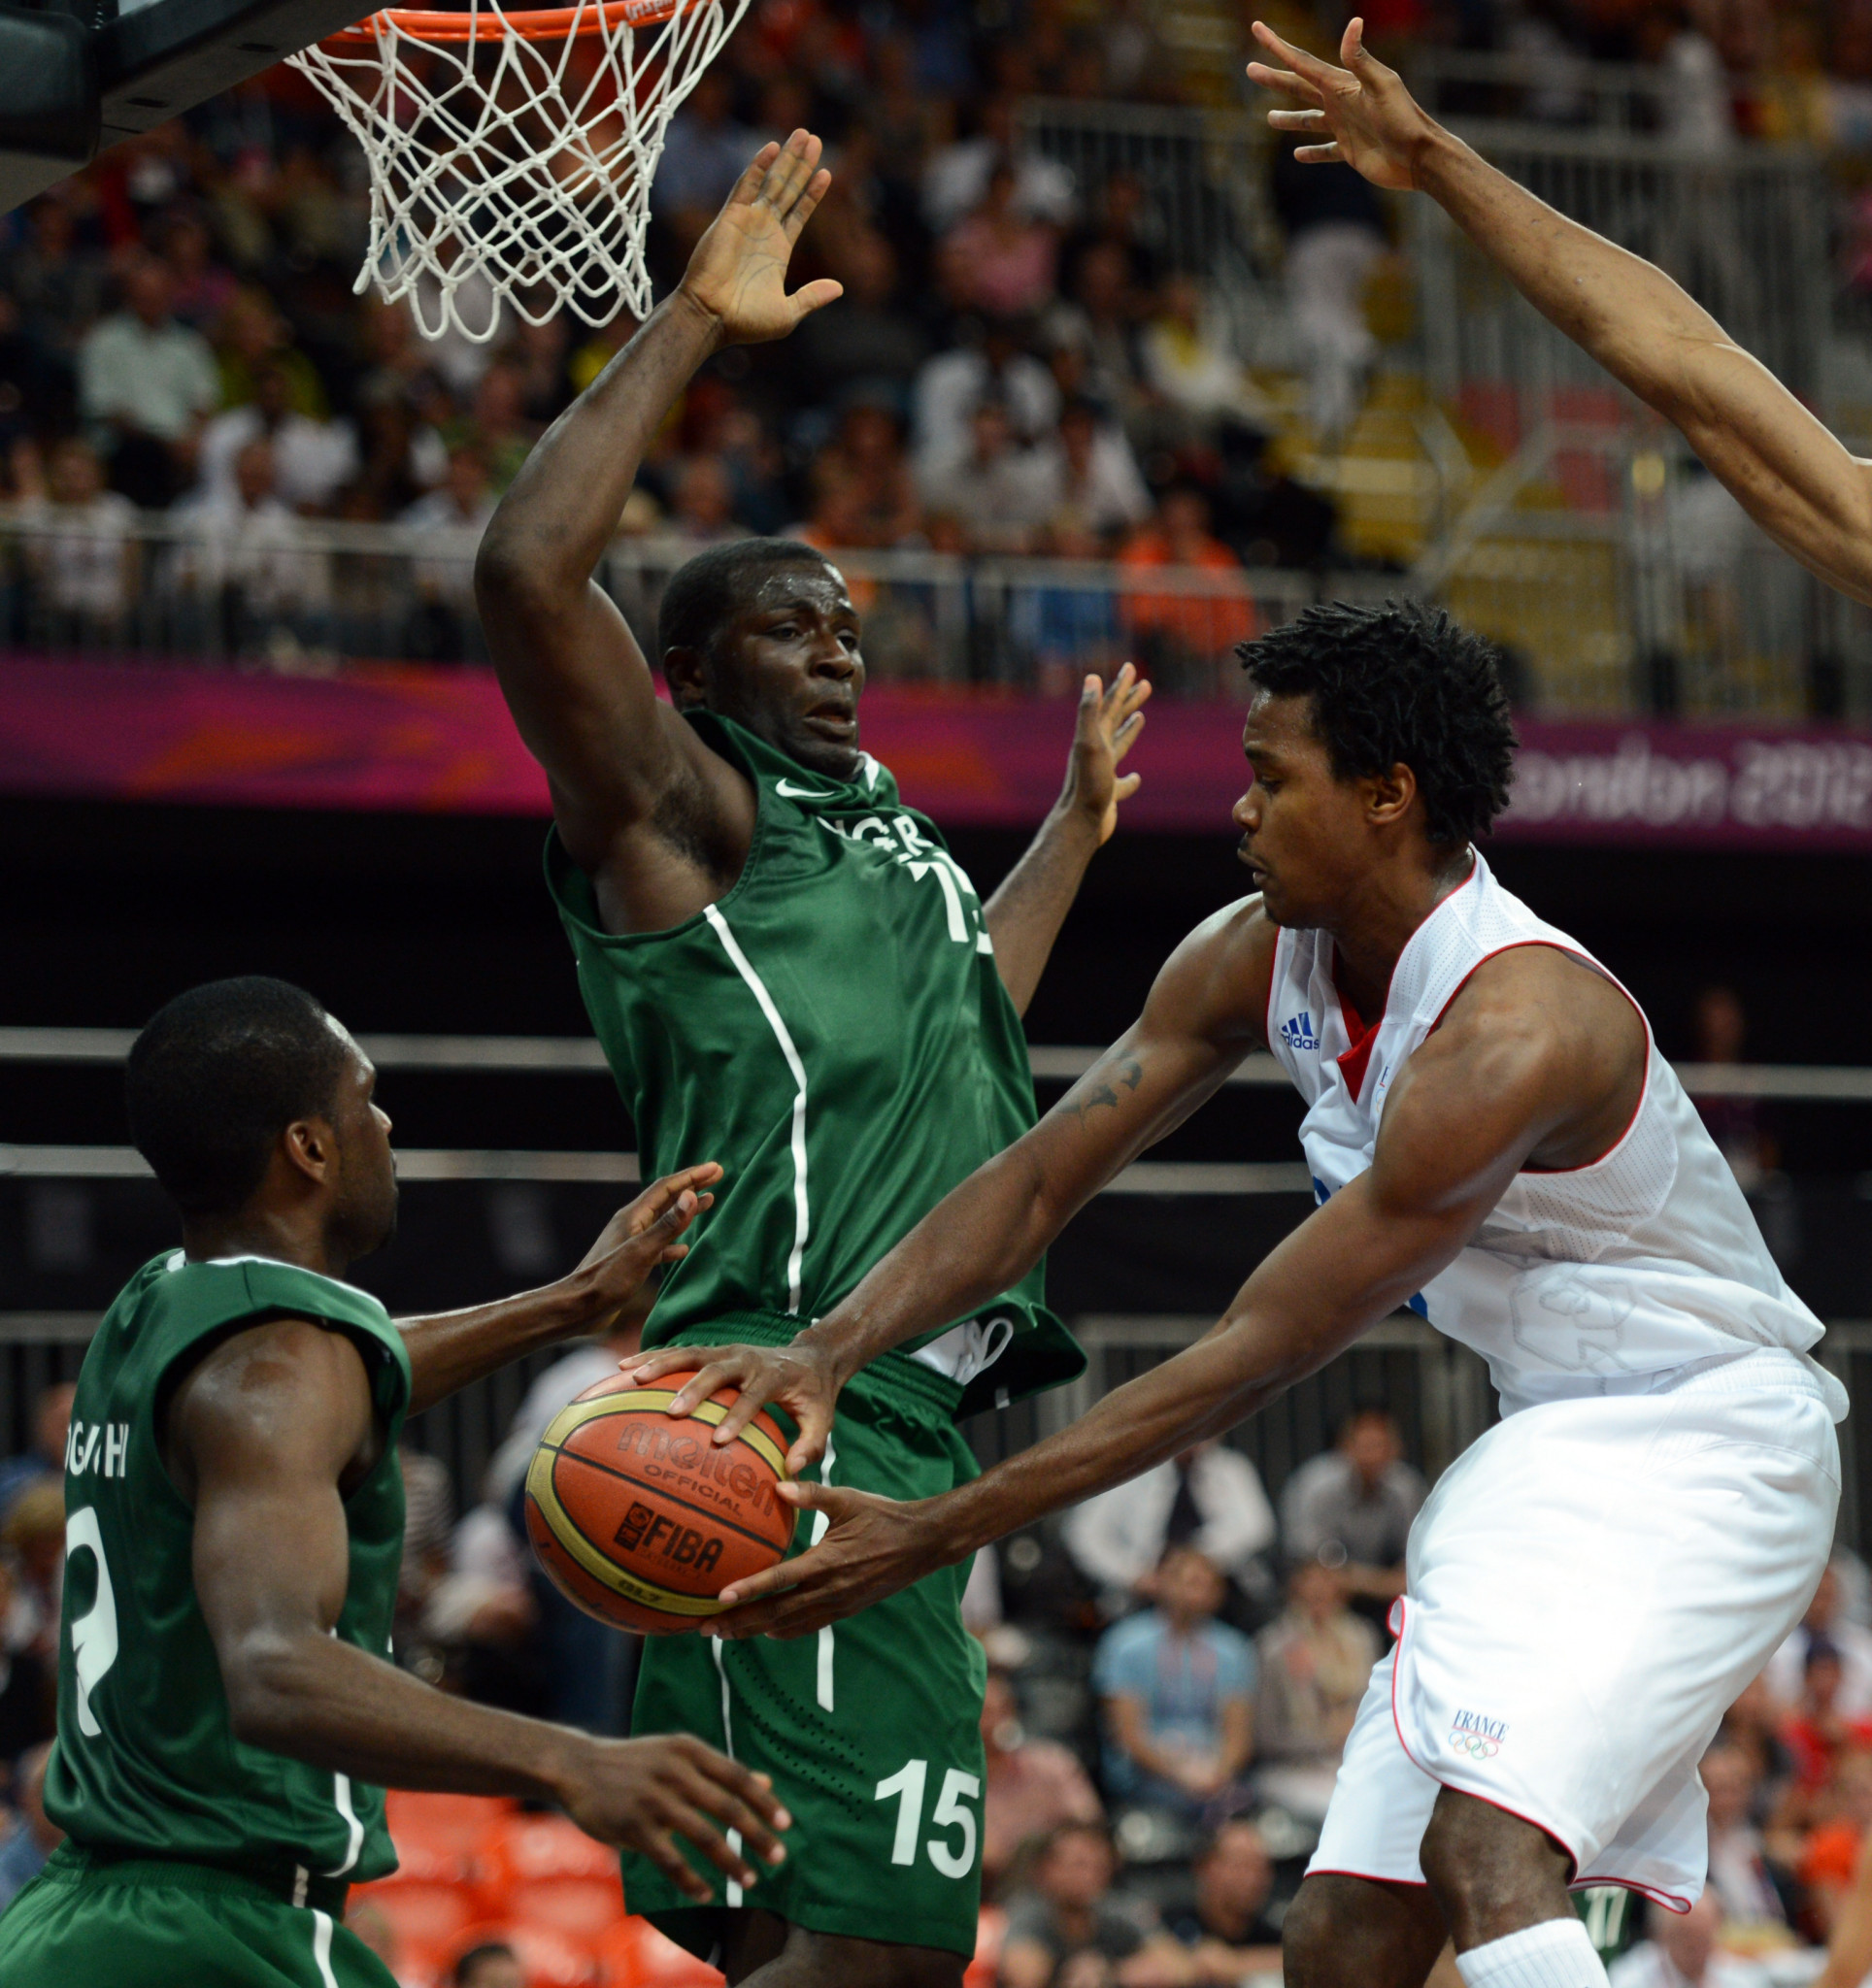 Basketball star Oyedeji re-elected as Nigeria Athletes Commission chairman